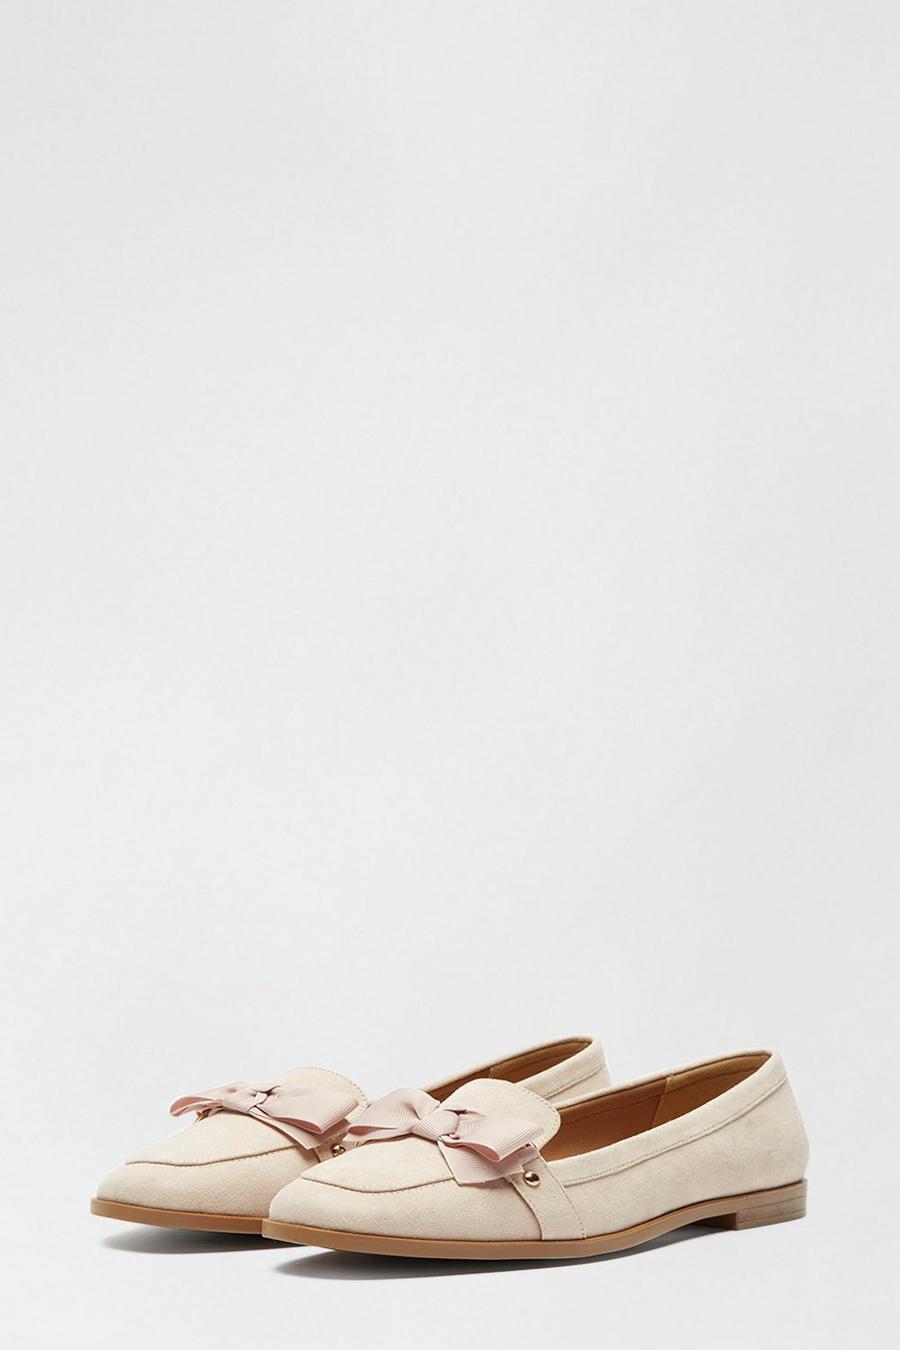 Blush Leatrice Bow Loafer